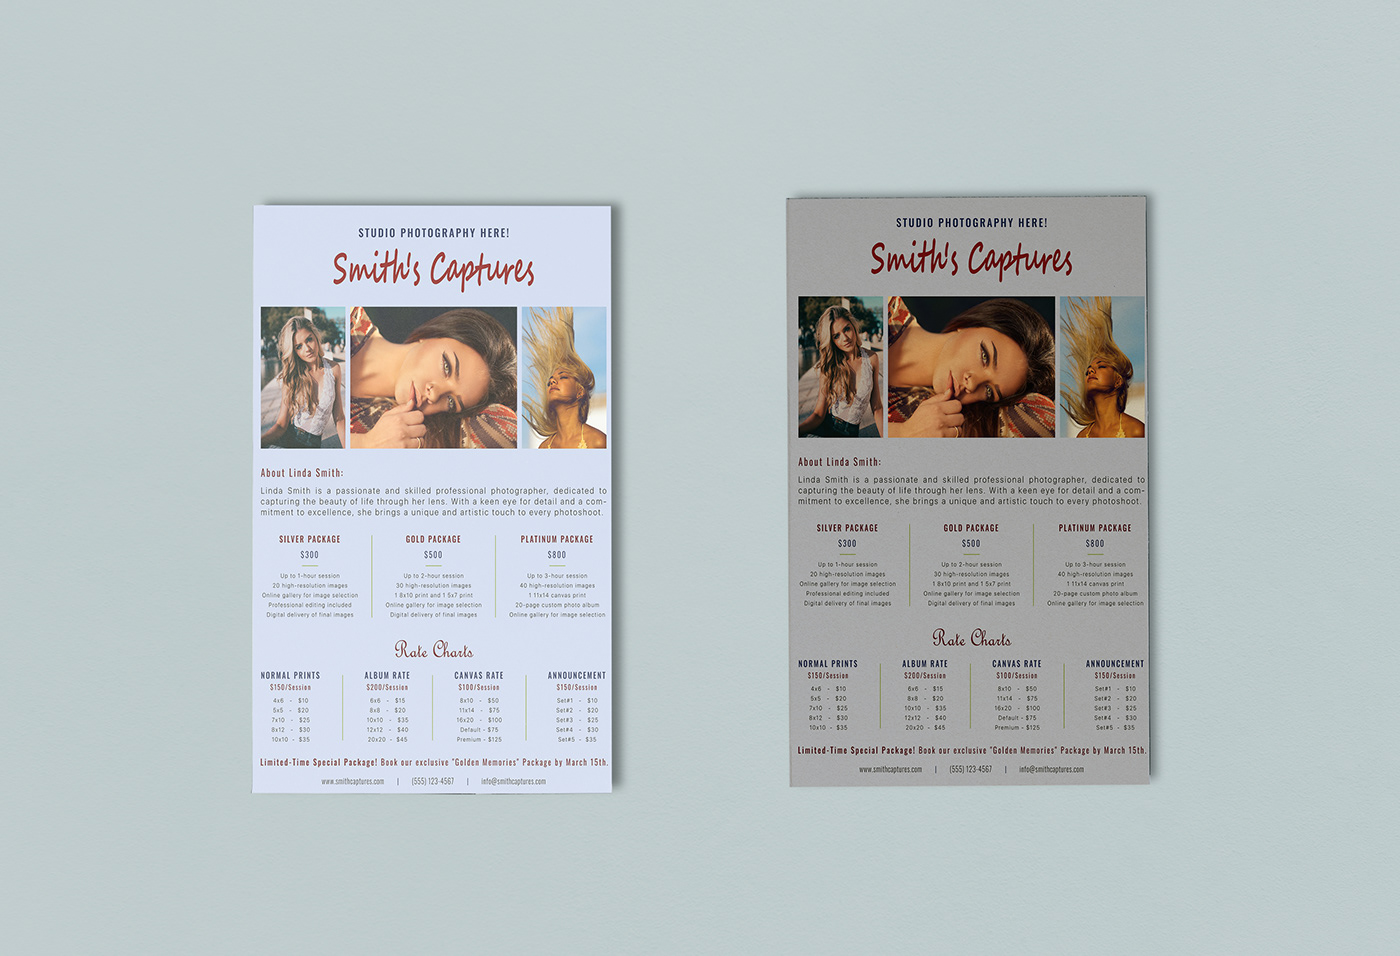 Media Kit media kit design INFLUENCER rate rate card Rate Chart price card price chart